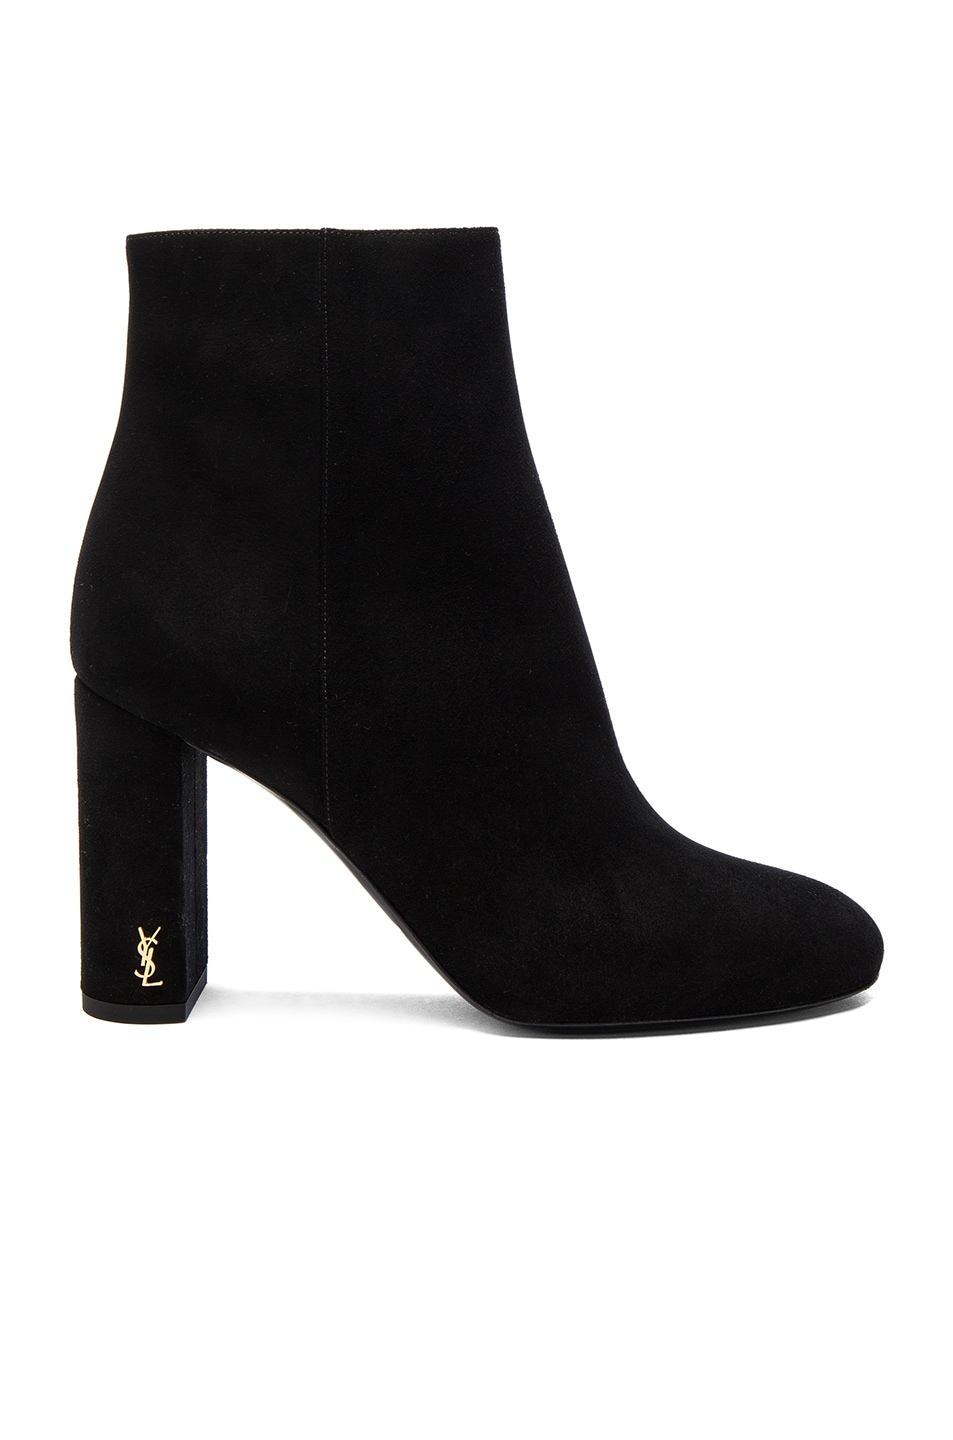 Saint Laurent Loulou Suede Boots in 